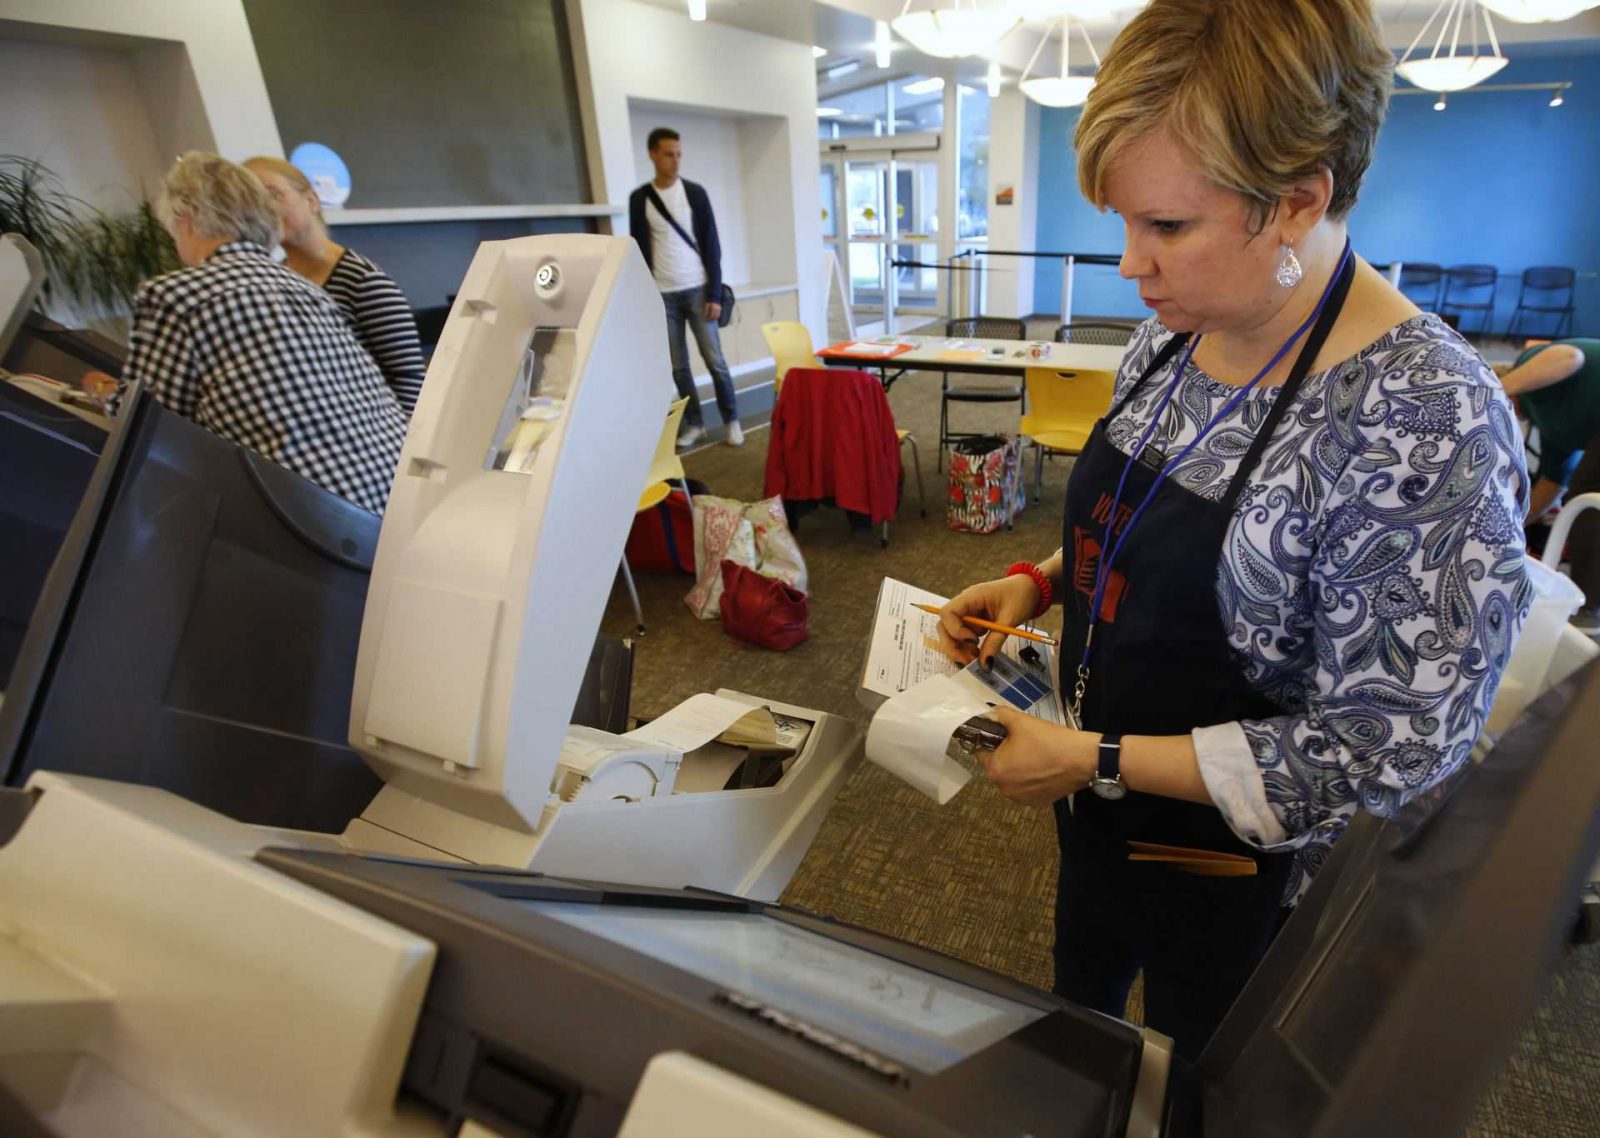 PROVO, UT - OCTOBER 25: Poll worker, Heather Uppencamp, sets up a voting machine for the first day of early voting at the Provo Recreation Center on October 25, 2016 in Provo, Utah. Early voting in the 2016 presidential election for Utah residents begins October 25 and ends November 4. George Frey/Getty Images/AFP == FOR NEWSPAPERS, INTERNET, TELCOS & TELEVISION USE ONLY ==